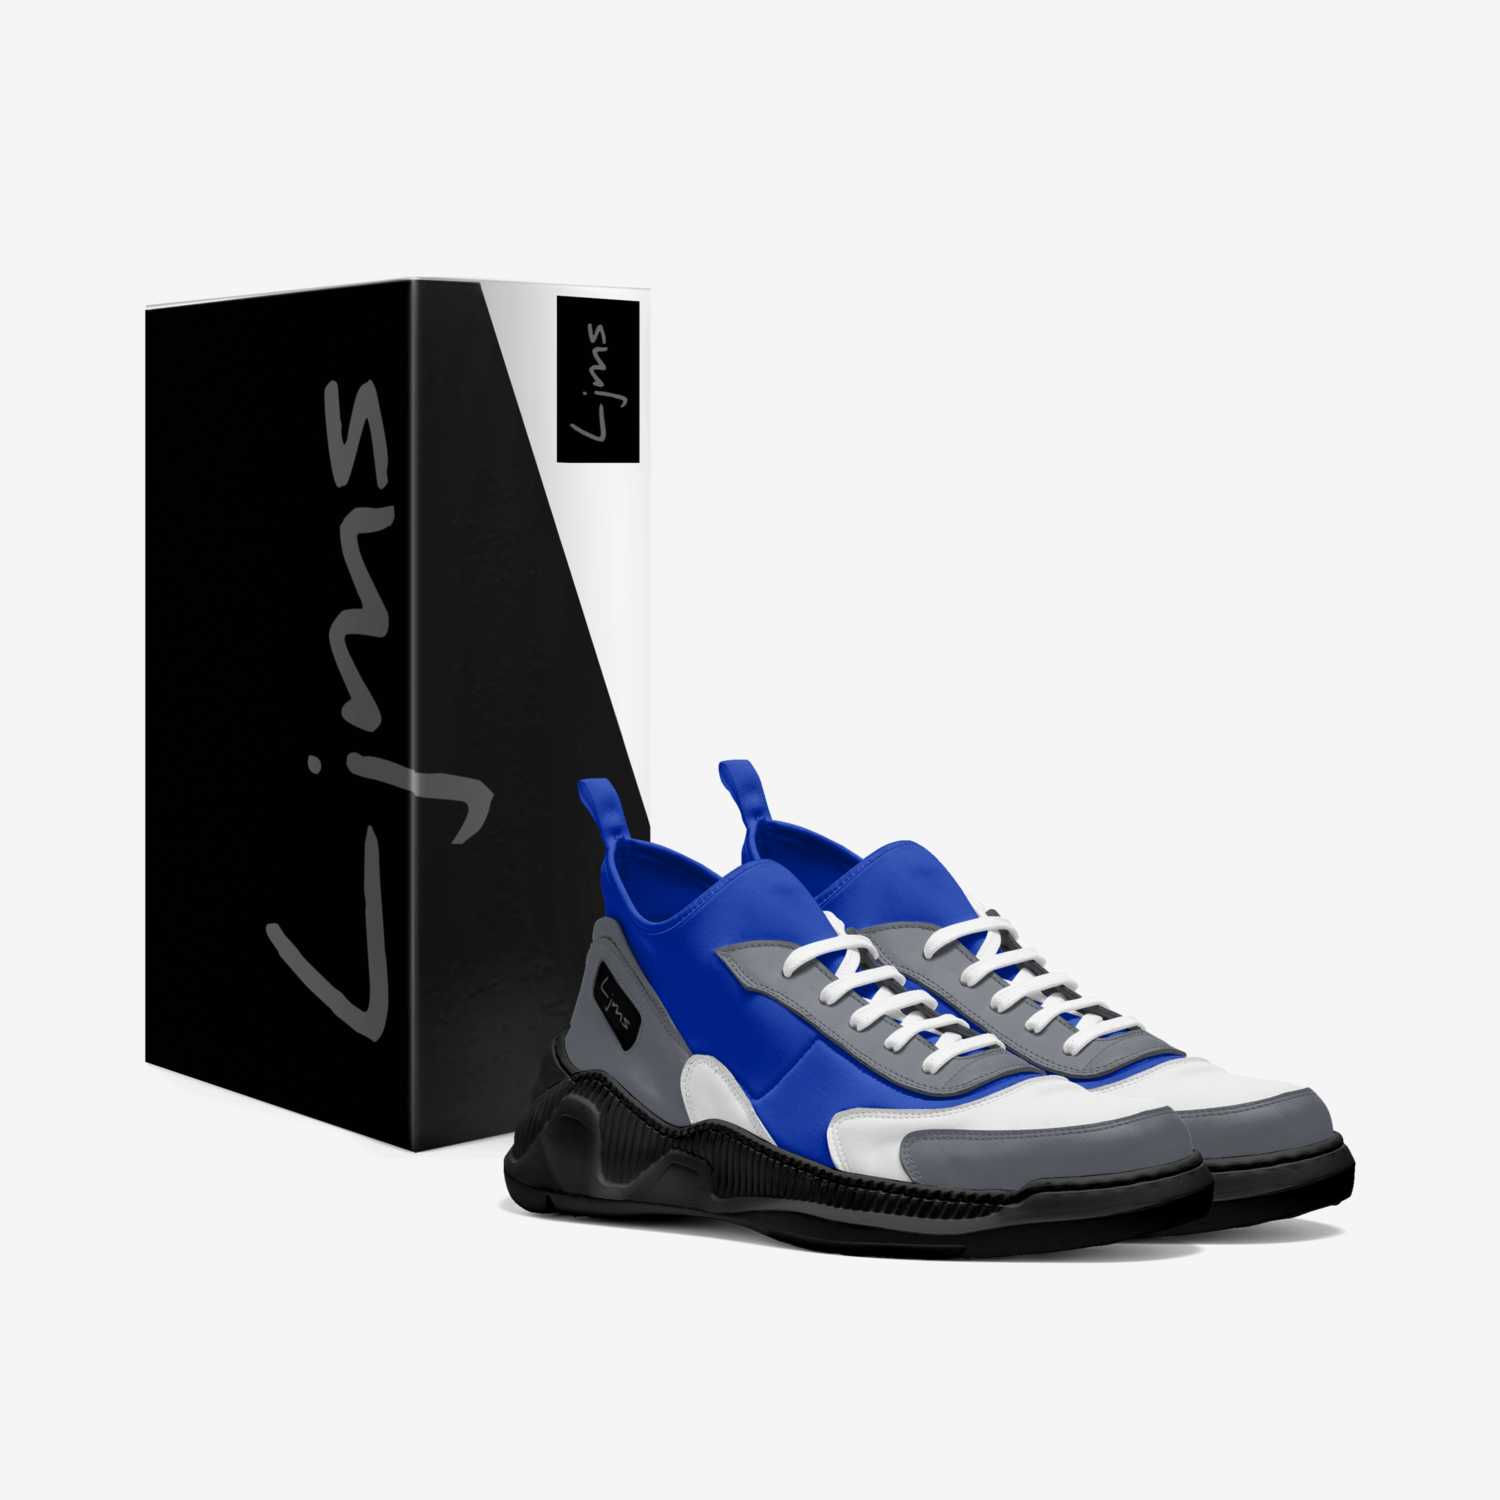 Ljms-Tracks  custom made in Italy shoes by Ljms Fashion | Box view